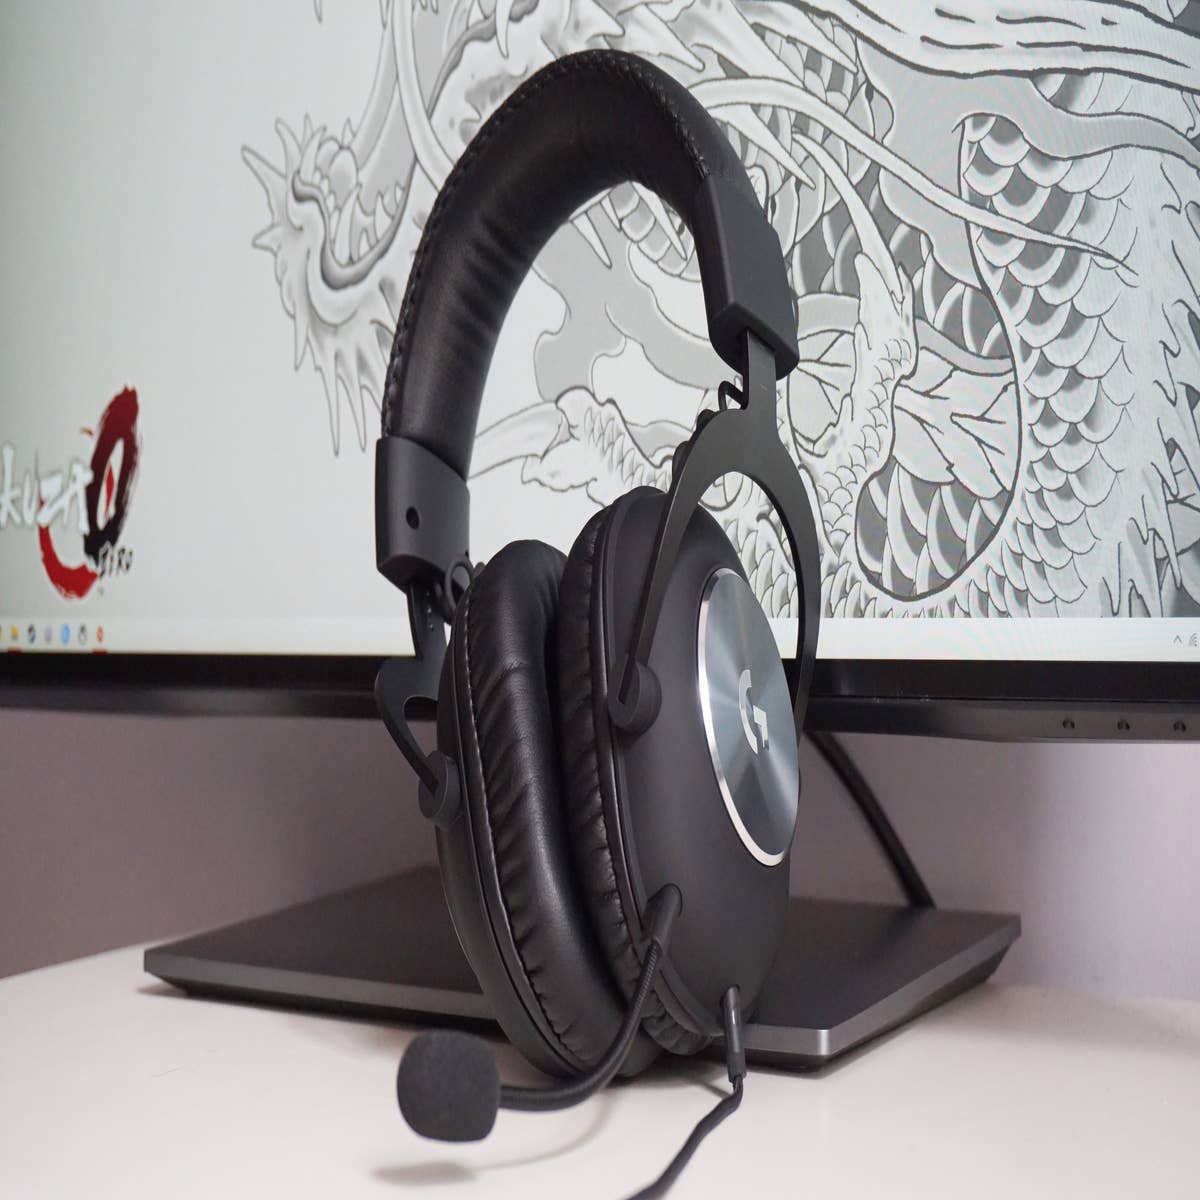 Logitech G Pro X review: An incredible gaming headset